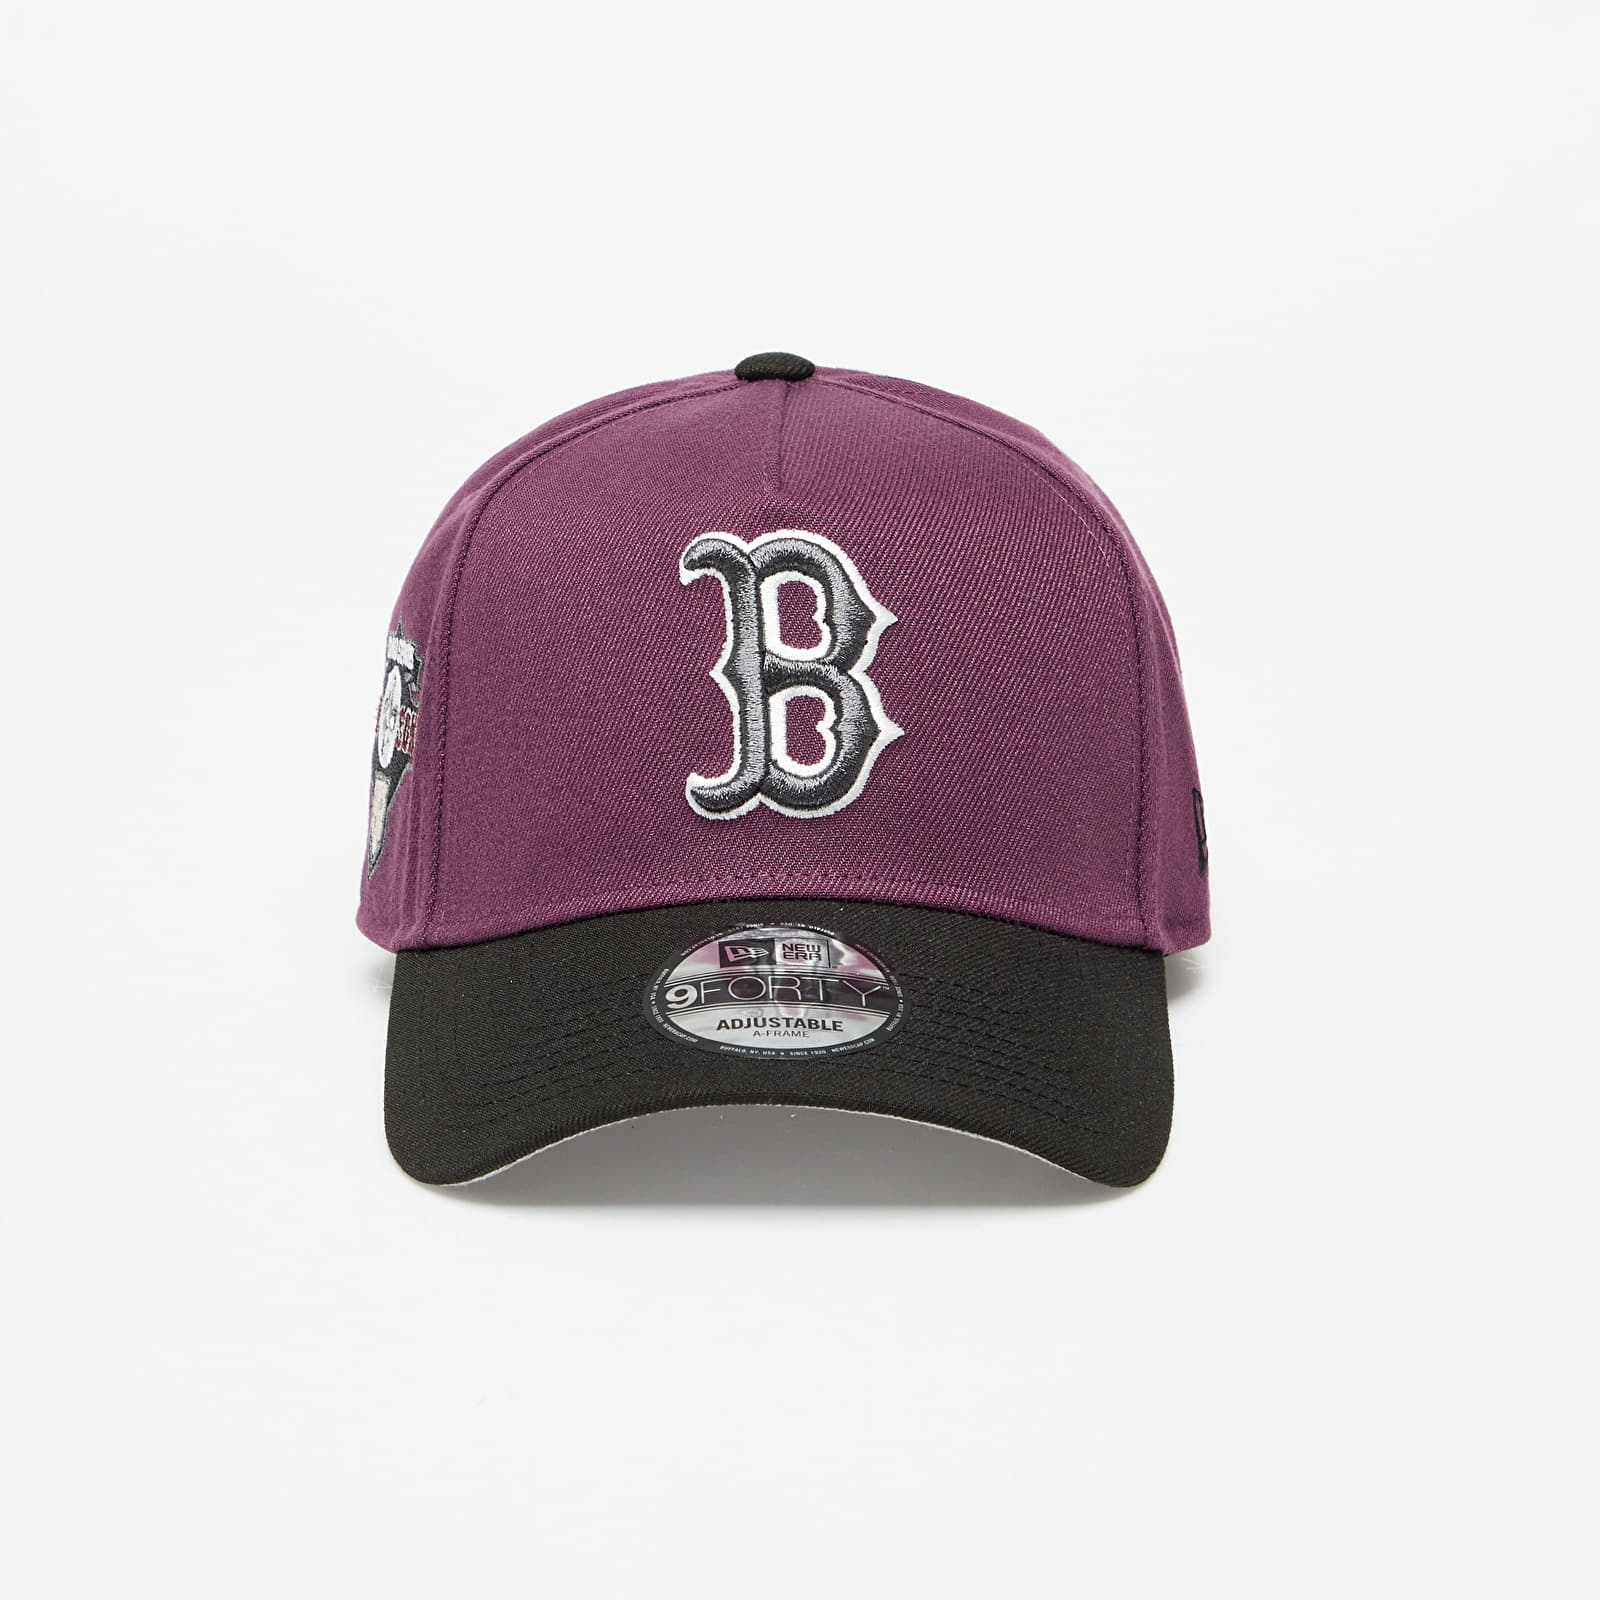 Caps New Era Boston Red Sox Two-Tone A-Frame 9FORTY Adjustable Cap Dark Purple